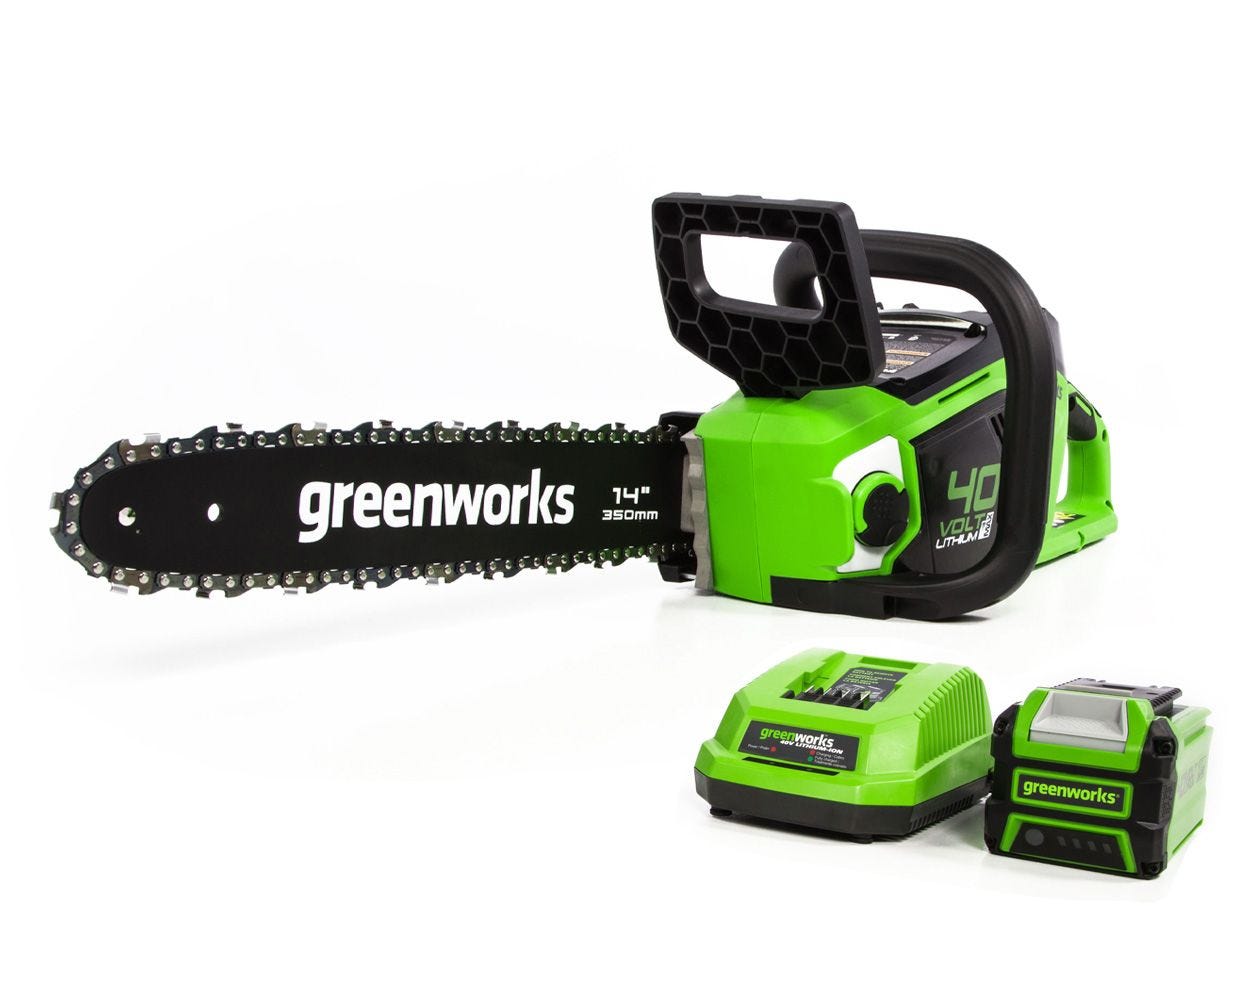 Greenworks 40V 14" Brushless Chainsaw with 2.5 Ah Battery & Charger 2012802 - image 1 of 13